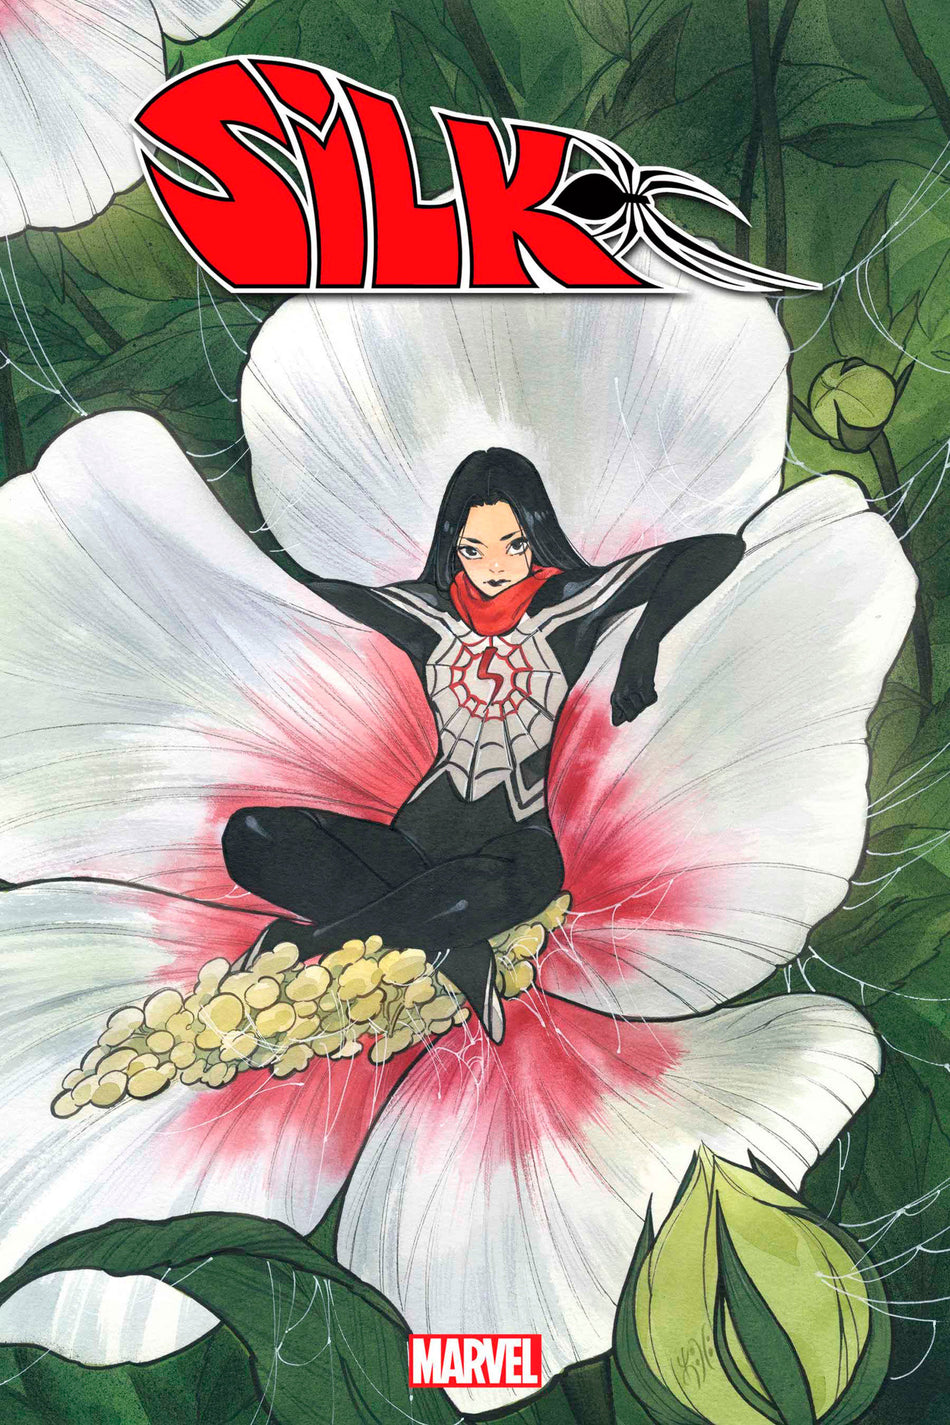 Stock Photo of Silk 1 Peach Momoko Variant comic sold by Stronghold Collectibles